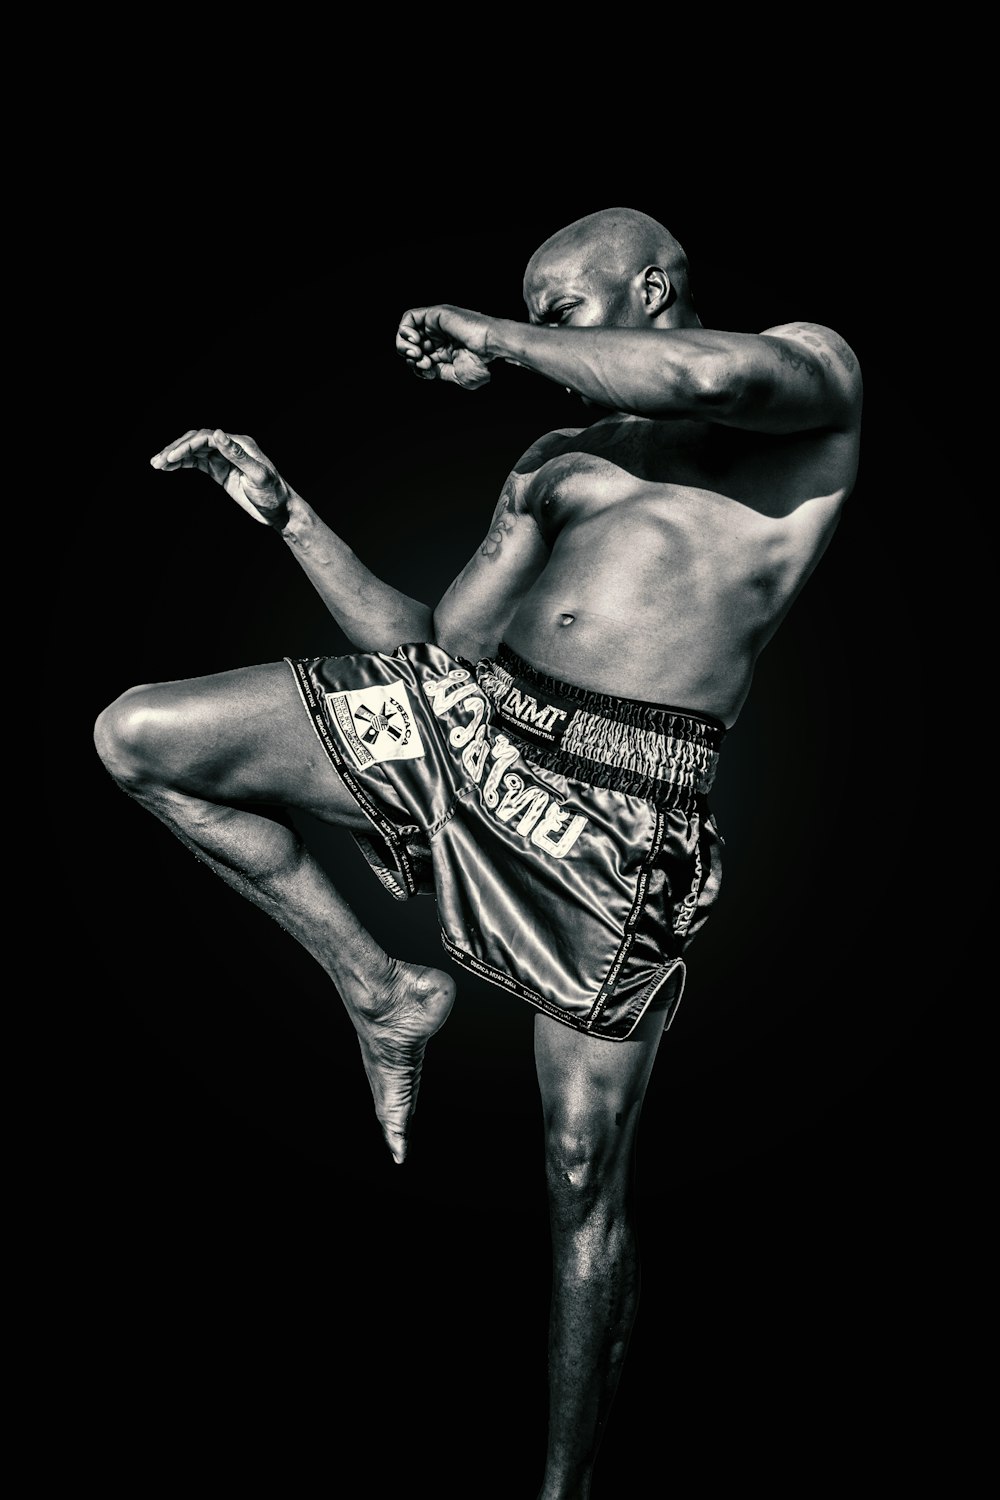 500+ Muay Thai Pictures | Download Free Images on Unsplash